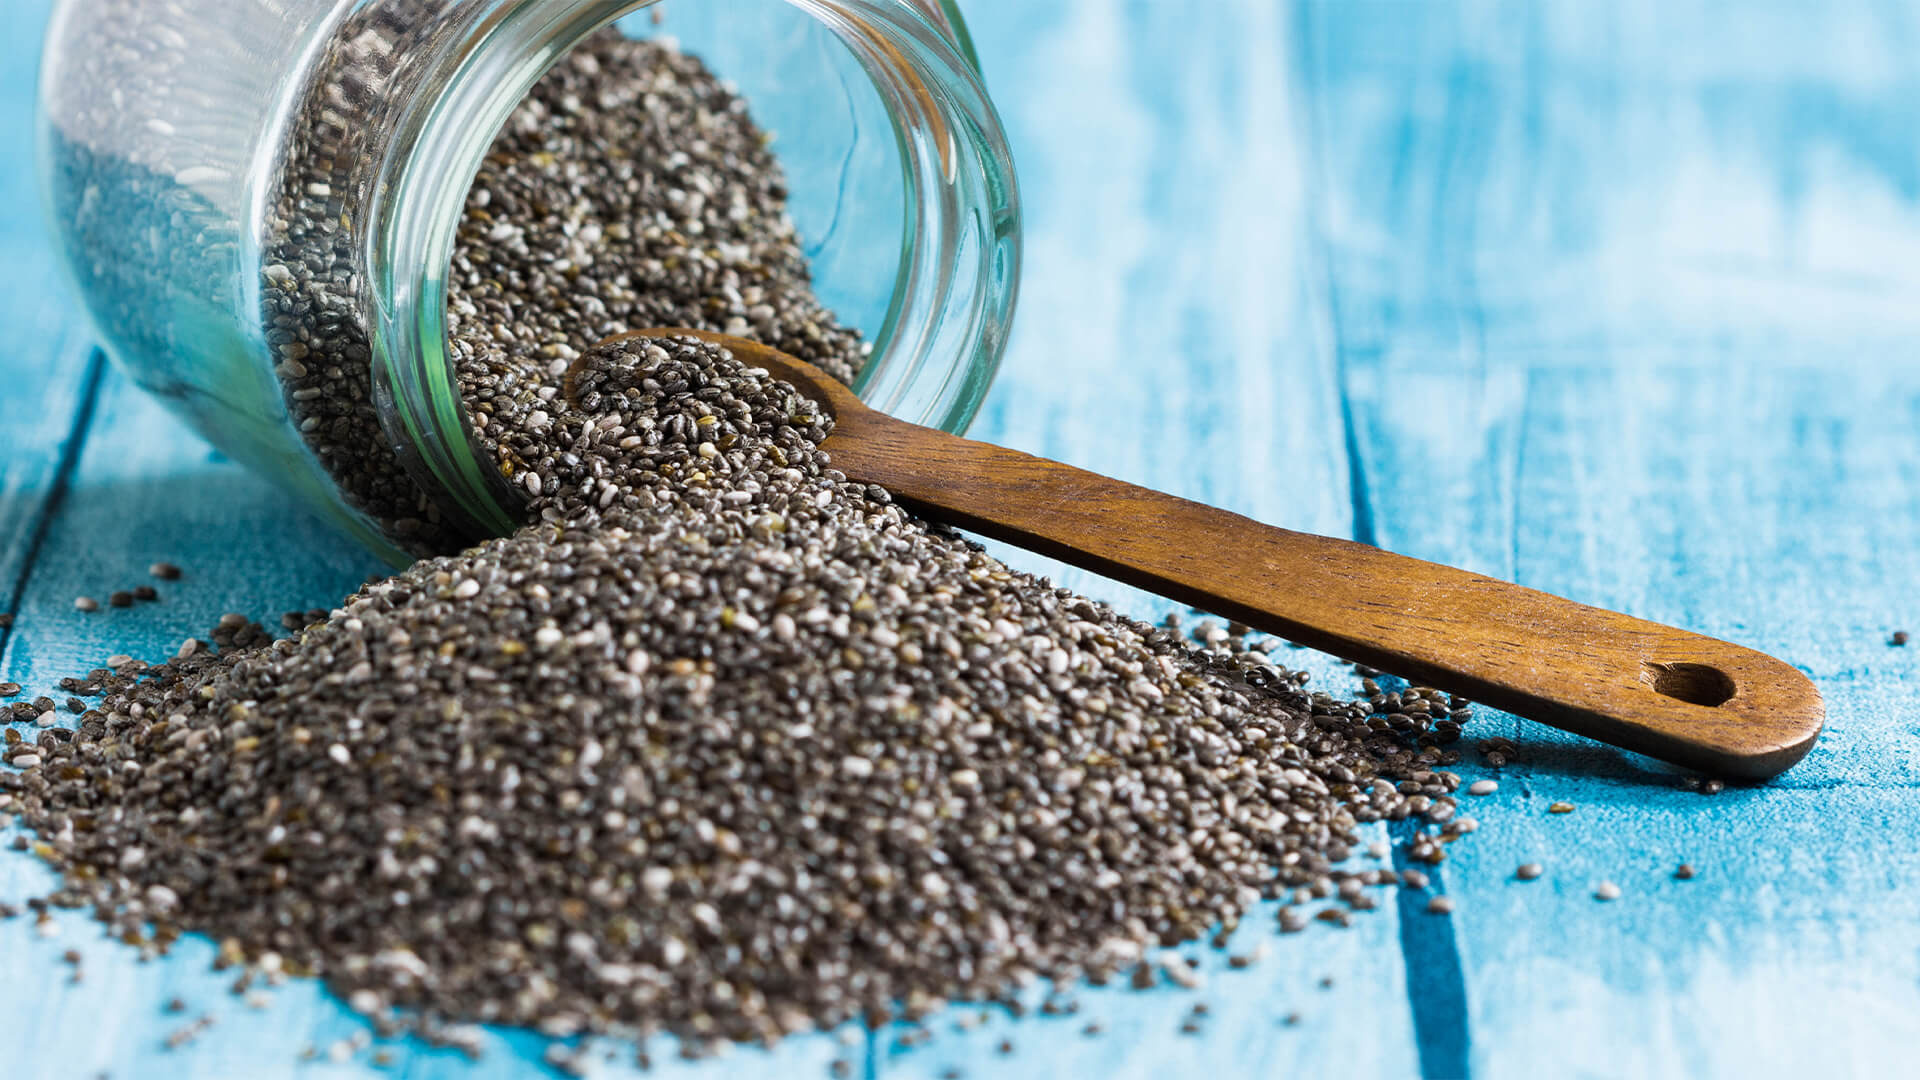 Chia seeds side effects, Potential risks, Digestive health, Moderation advice, 1920x1080 Full HD Desktop